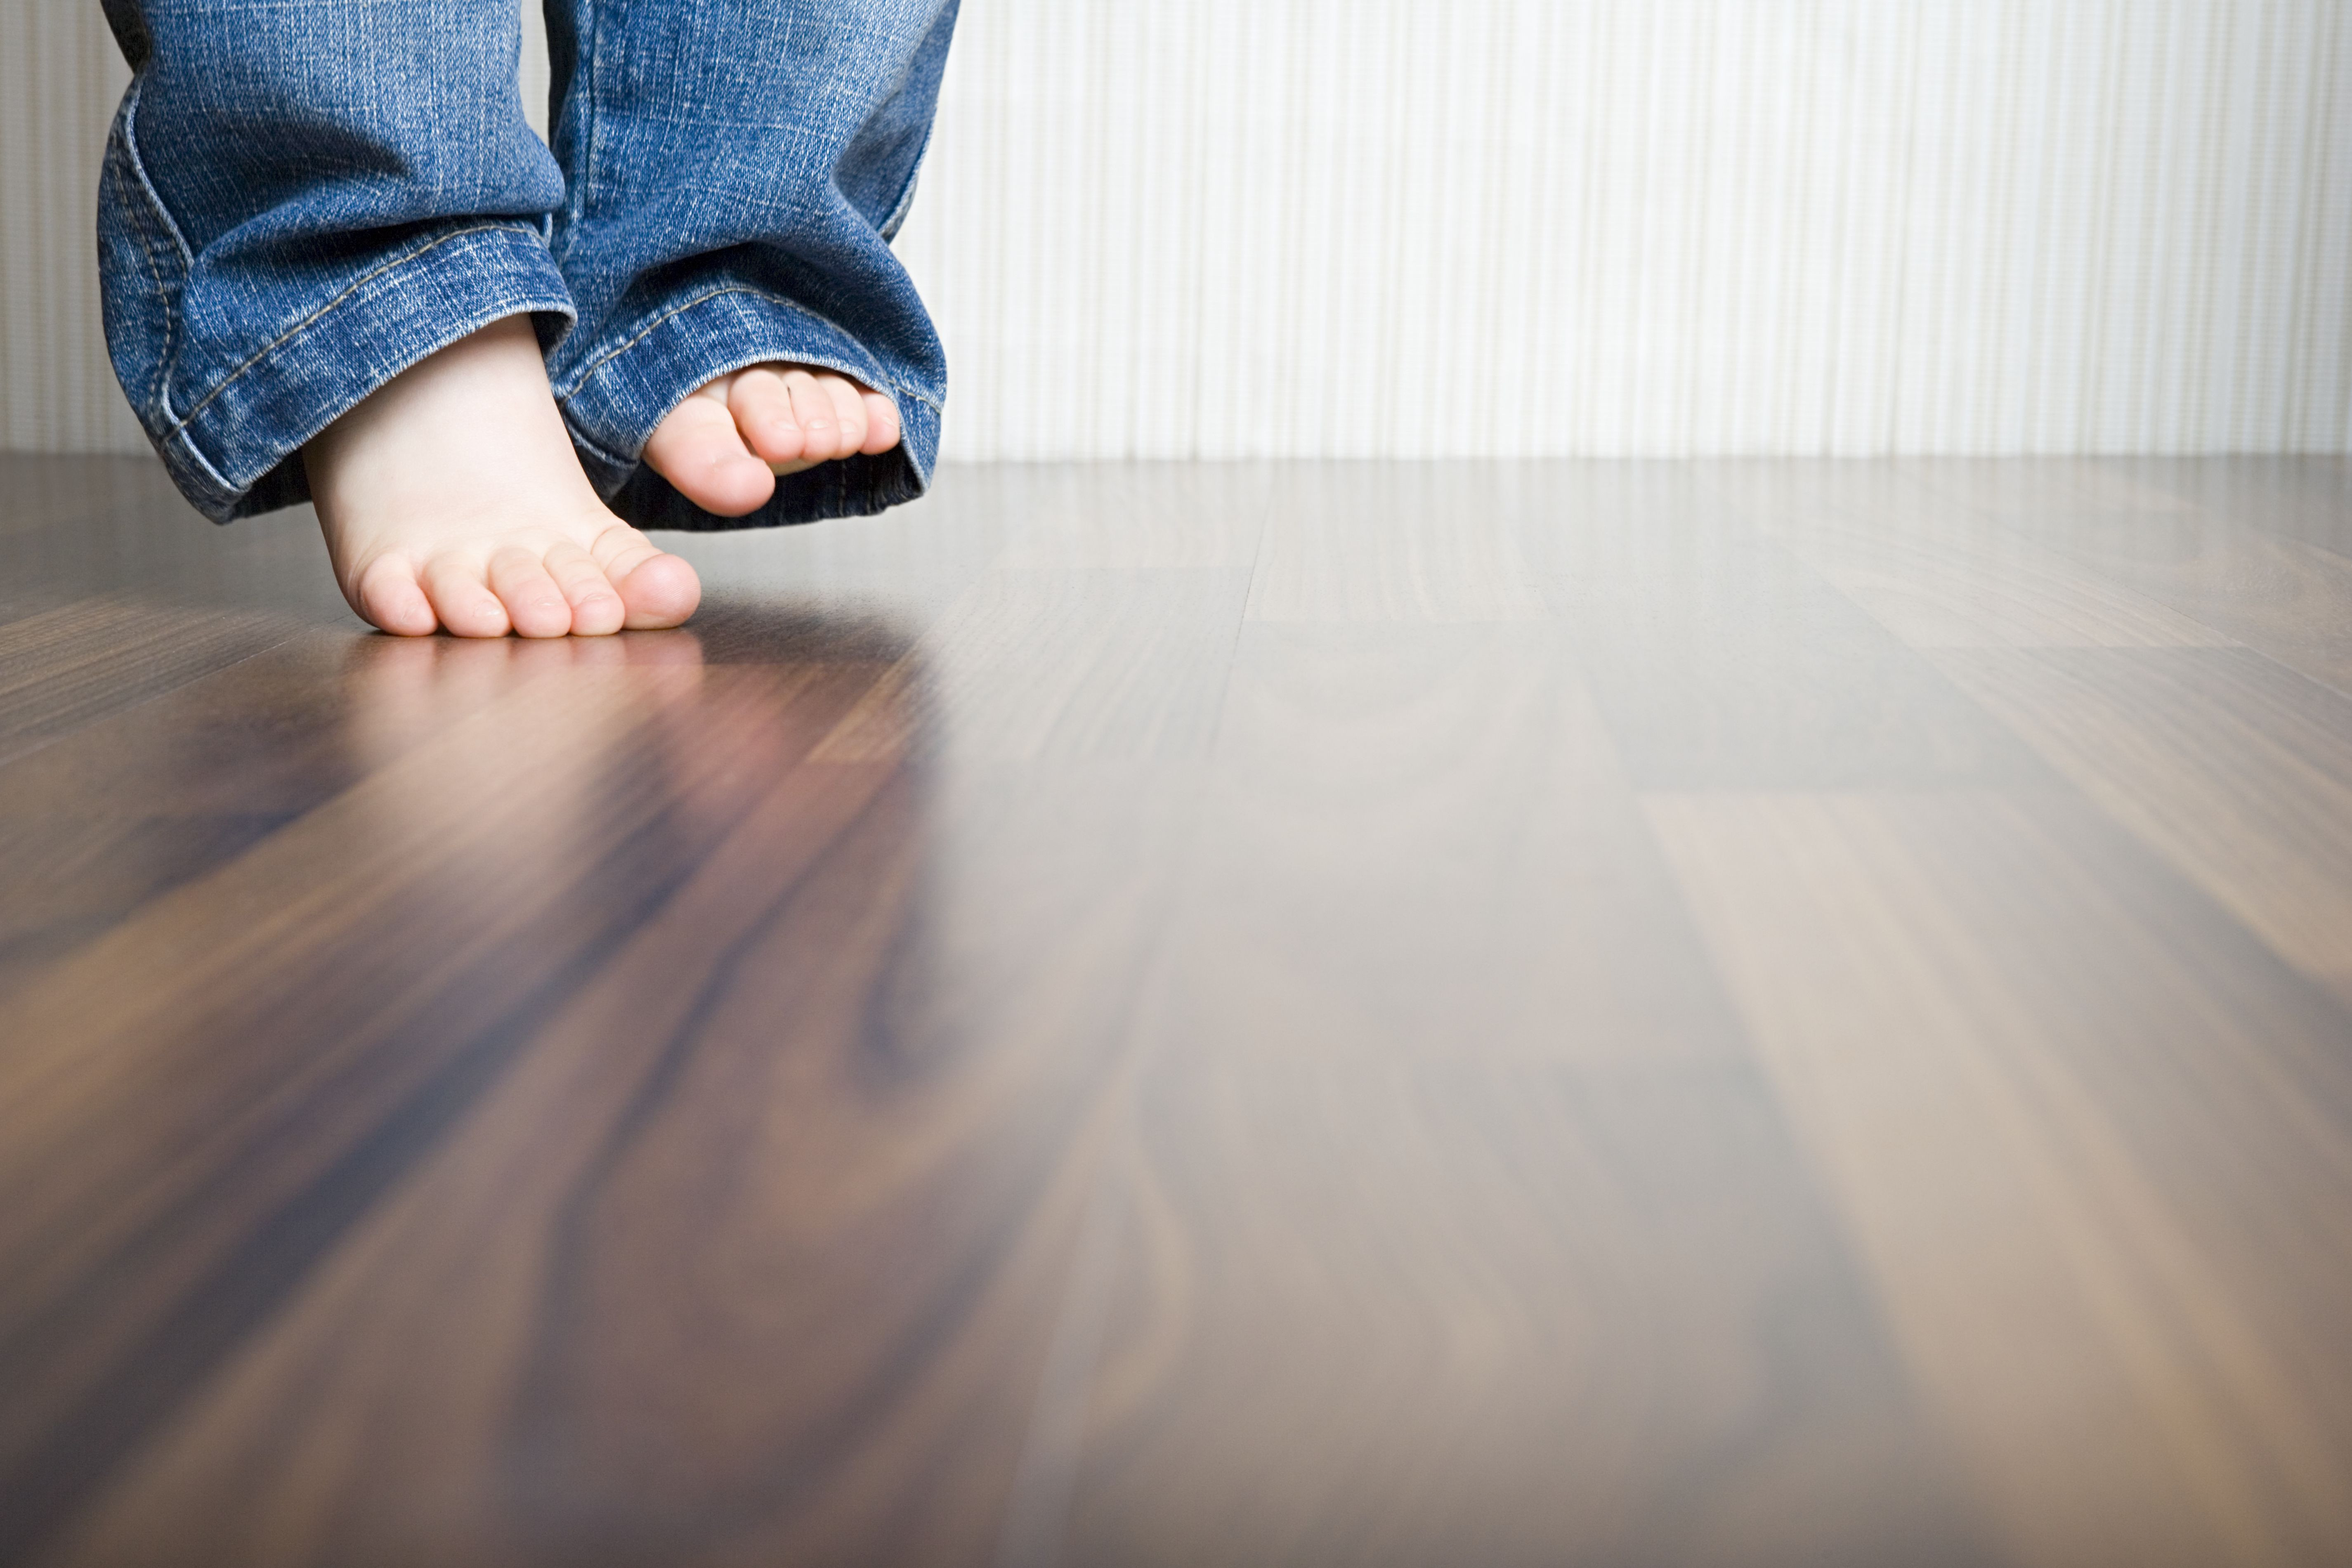 17 Fantastic Cost to Replace Hardwood Floors 2023 free download cost to replace hardwood floors of how to clean hardwood floors best way to clean wood flooring for 1512149908 gettyimages 75403973